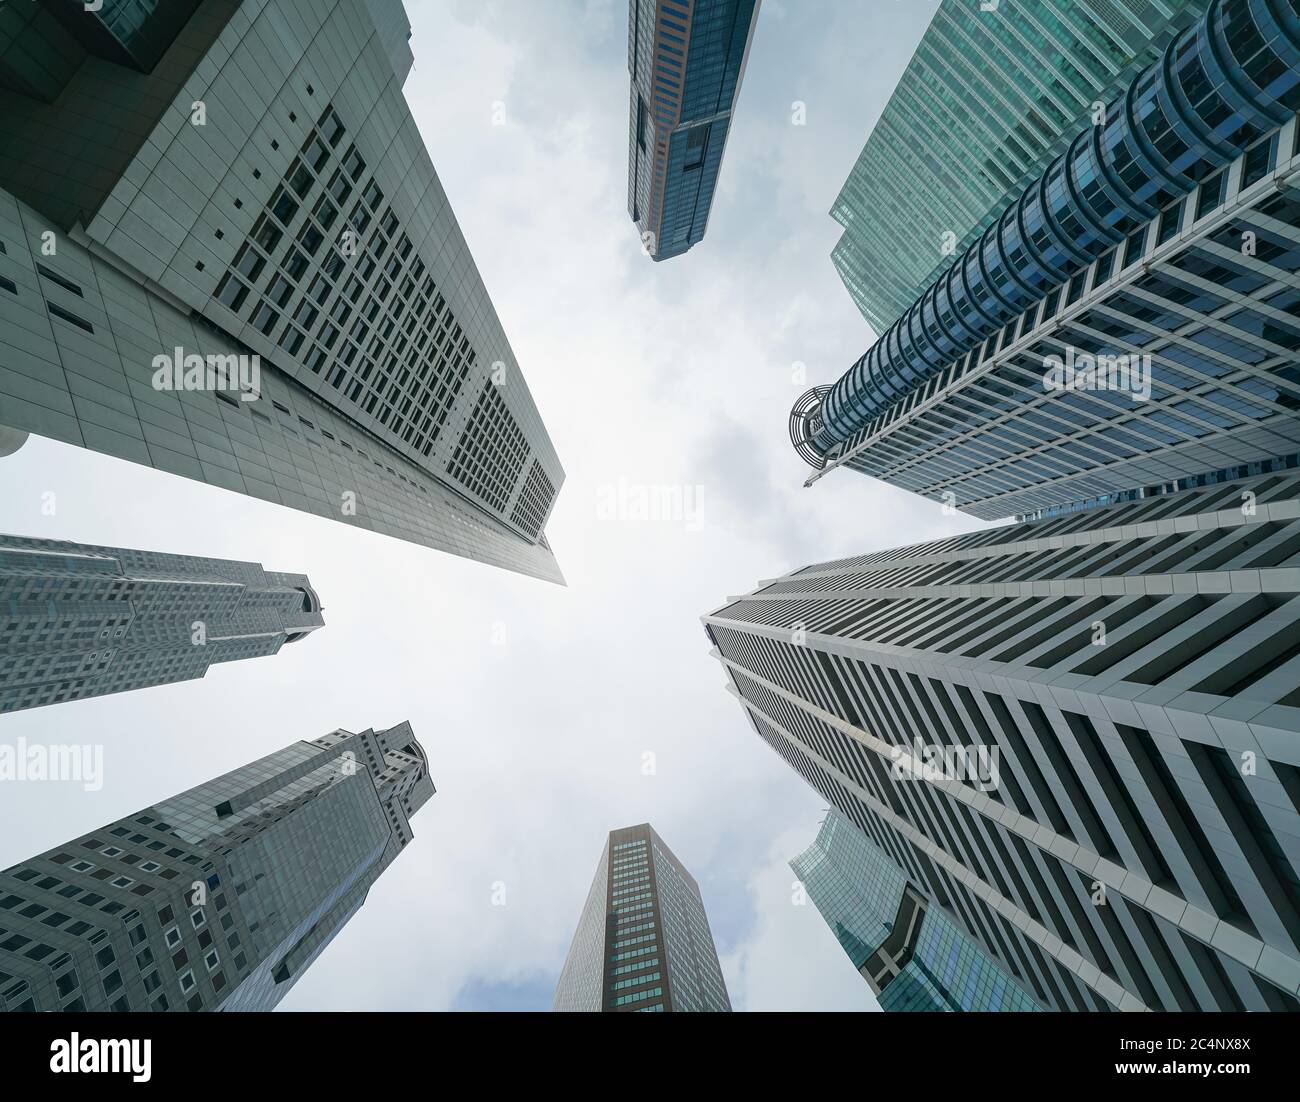 skyscrapers in Singapore central business district, Raffles place Stock Photo